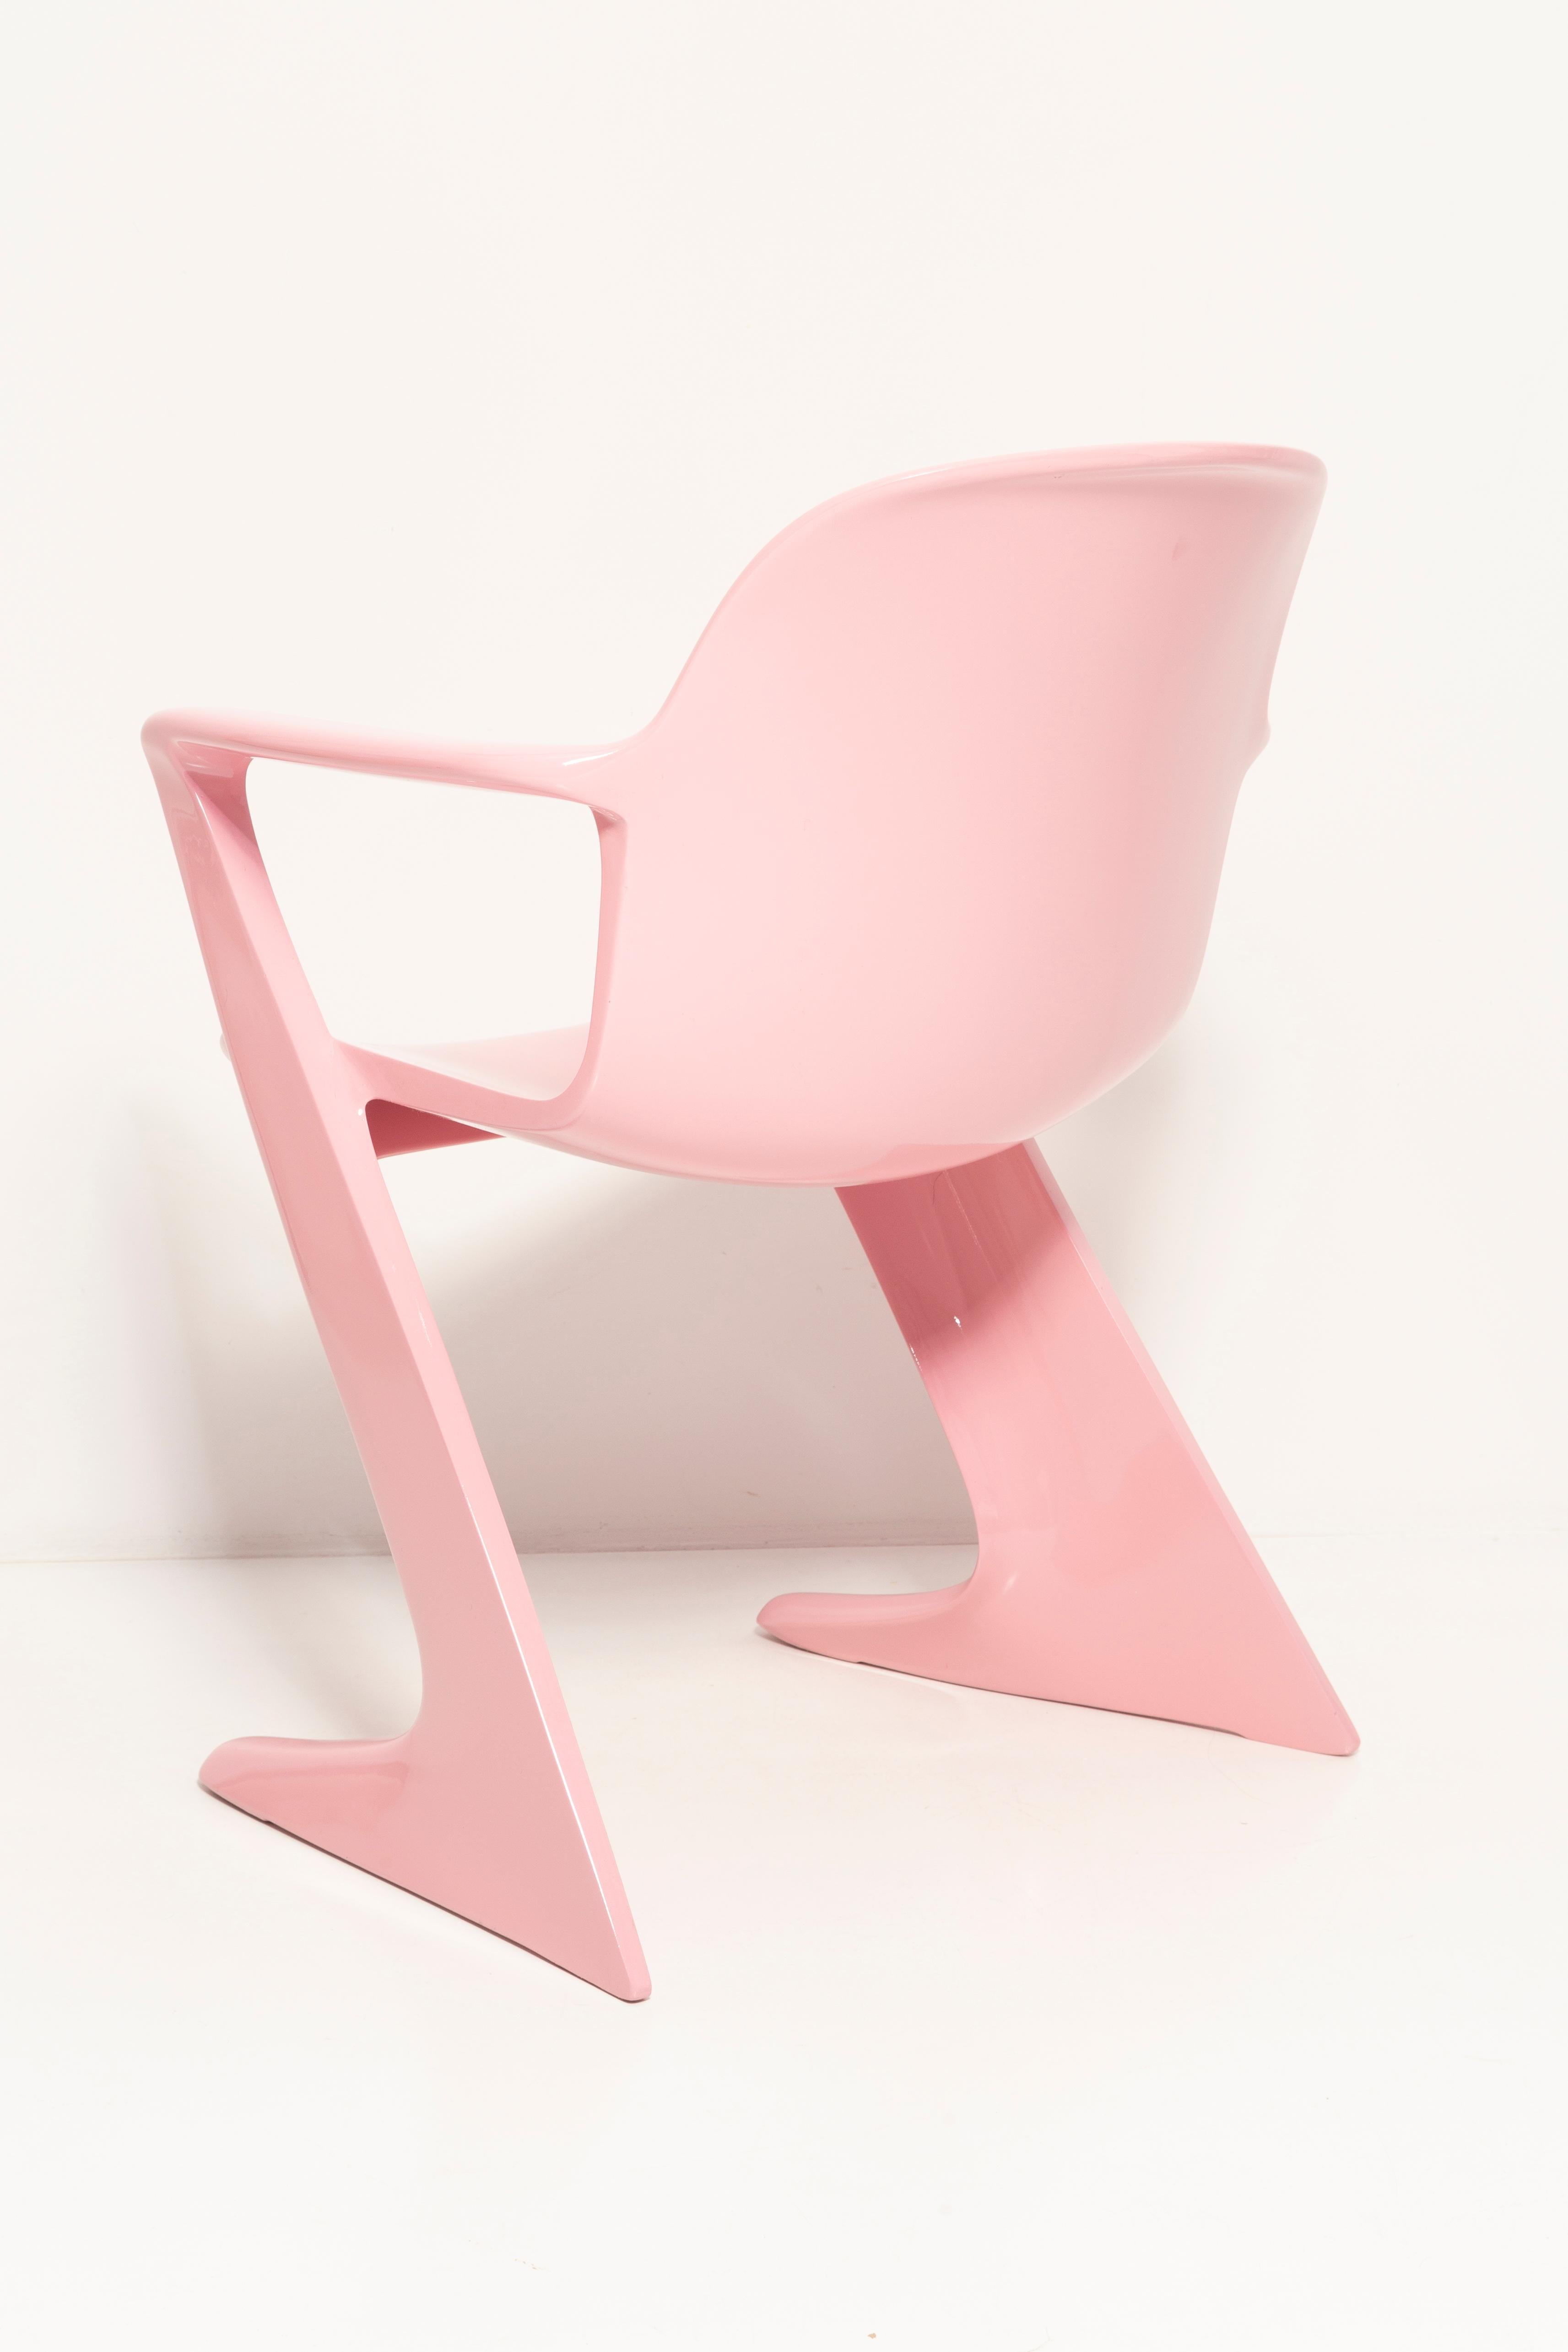 Set of Six Midcentury Pink Kangaroo Chairs, Ernst Moeckl, Germany, 1960s For Sale 6